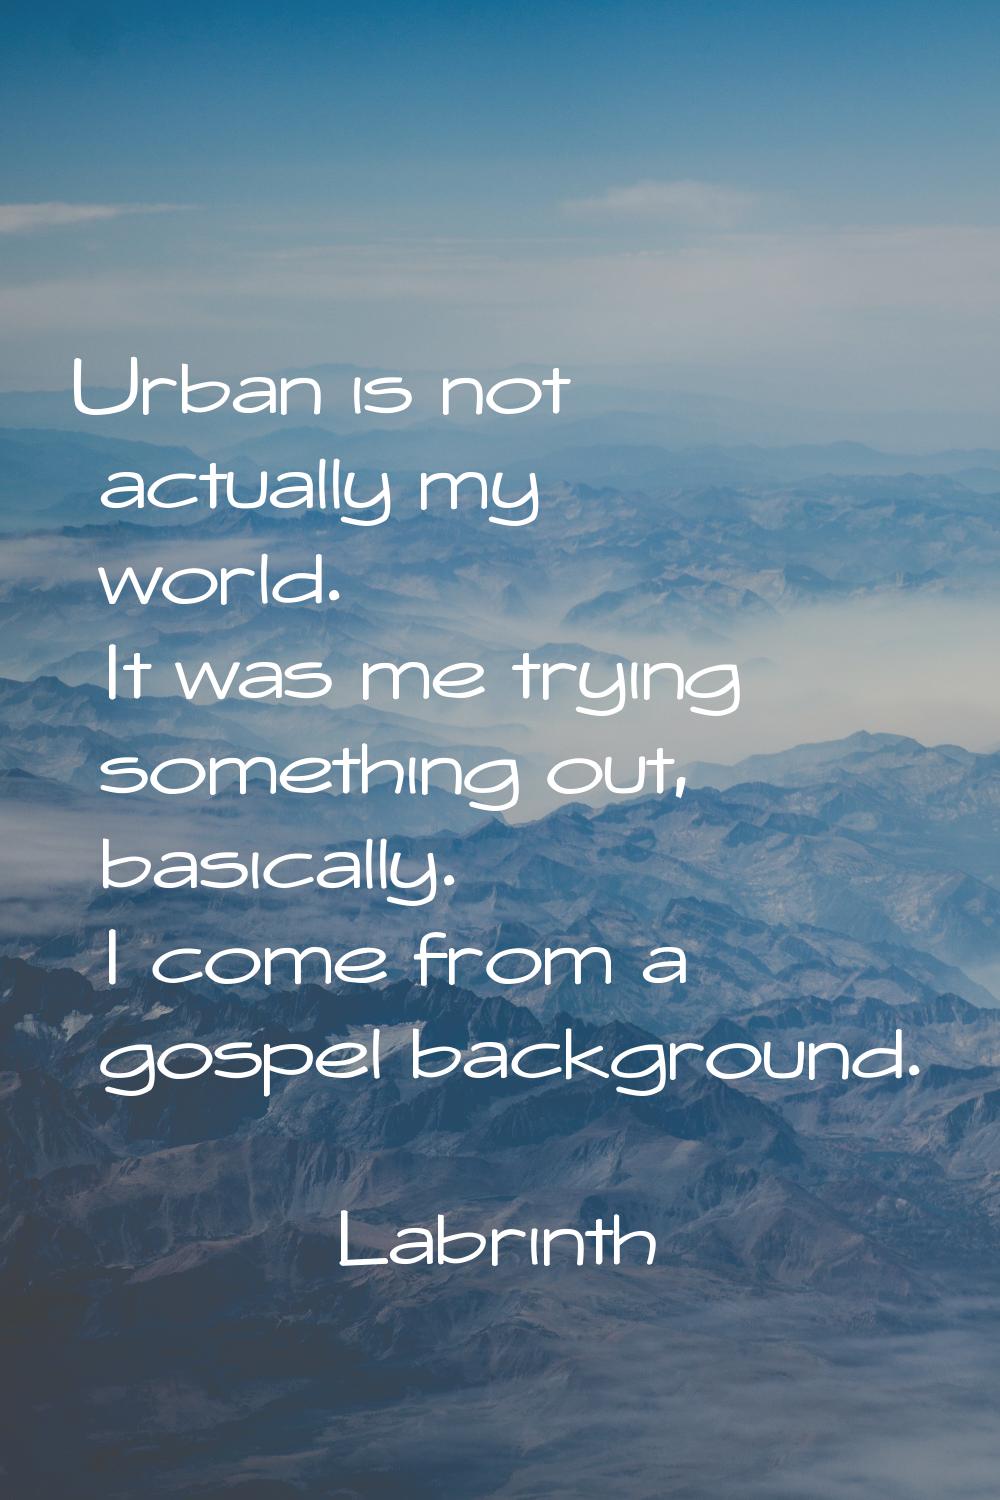 Urban is not actually my world. It was me trying something out, basically. I come from a gospel bac